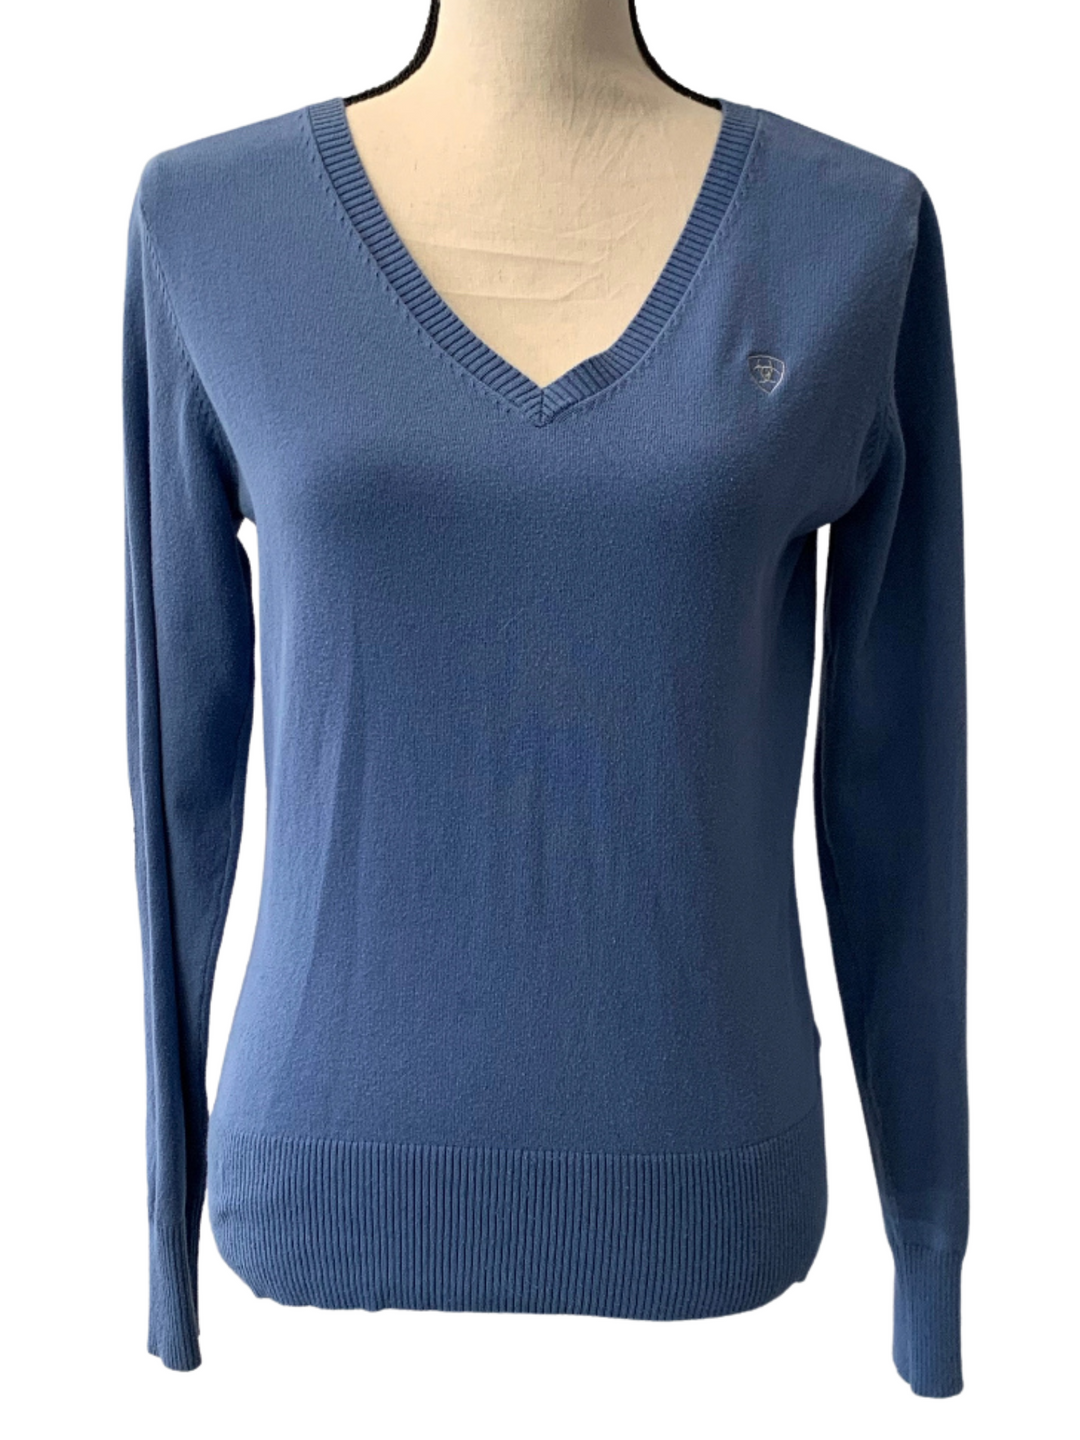 PRE-LOVED ARIAT COTTON V NECK SWEATER